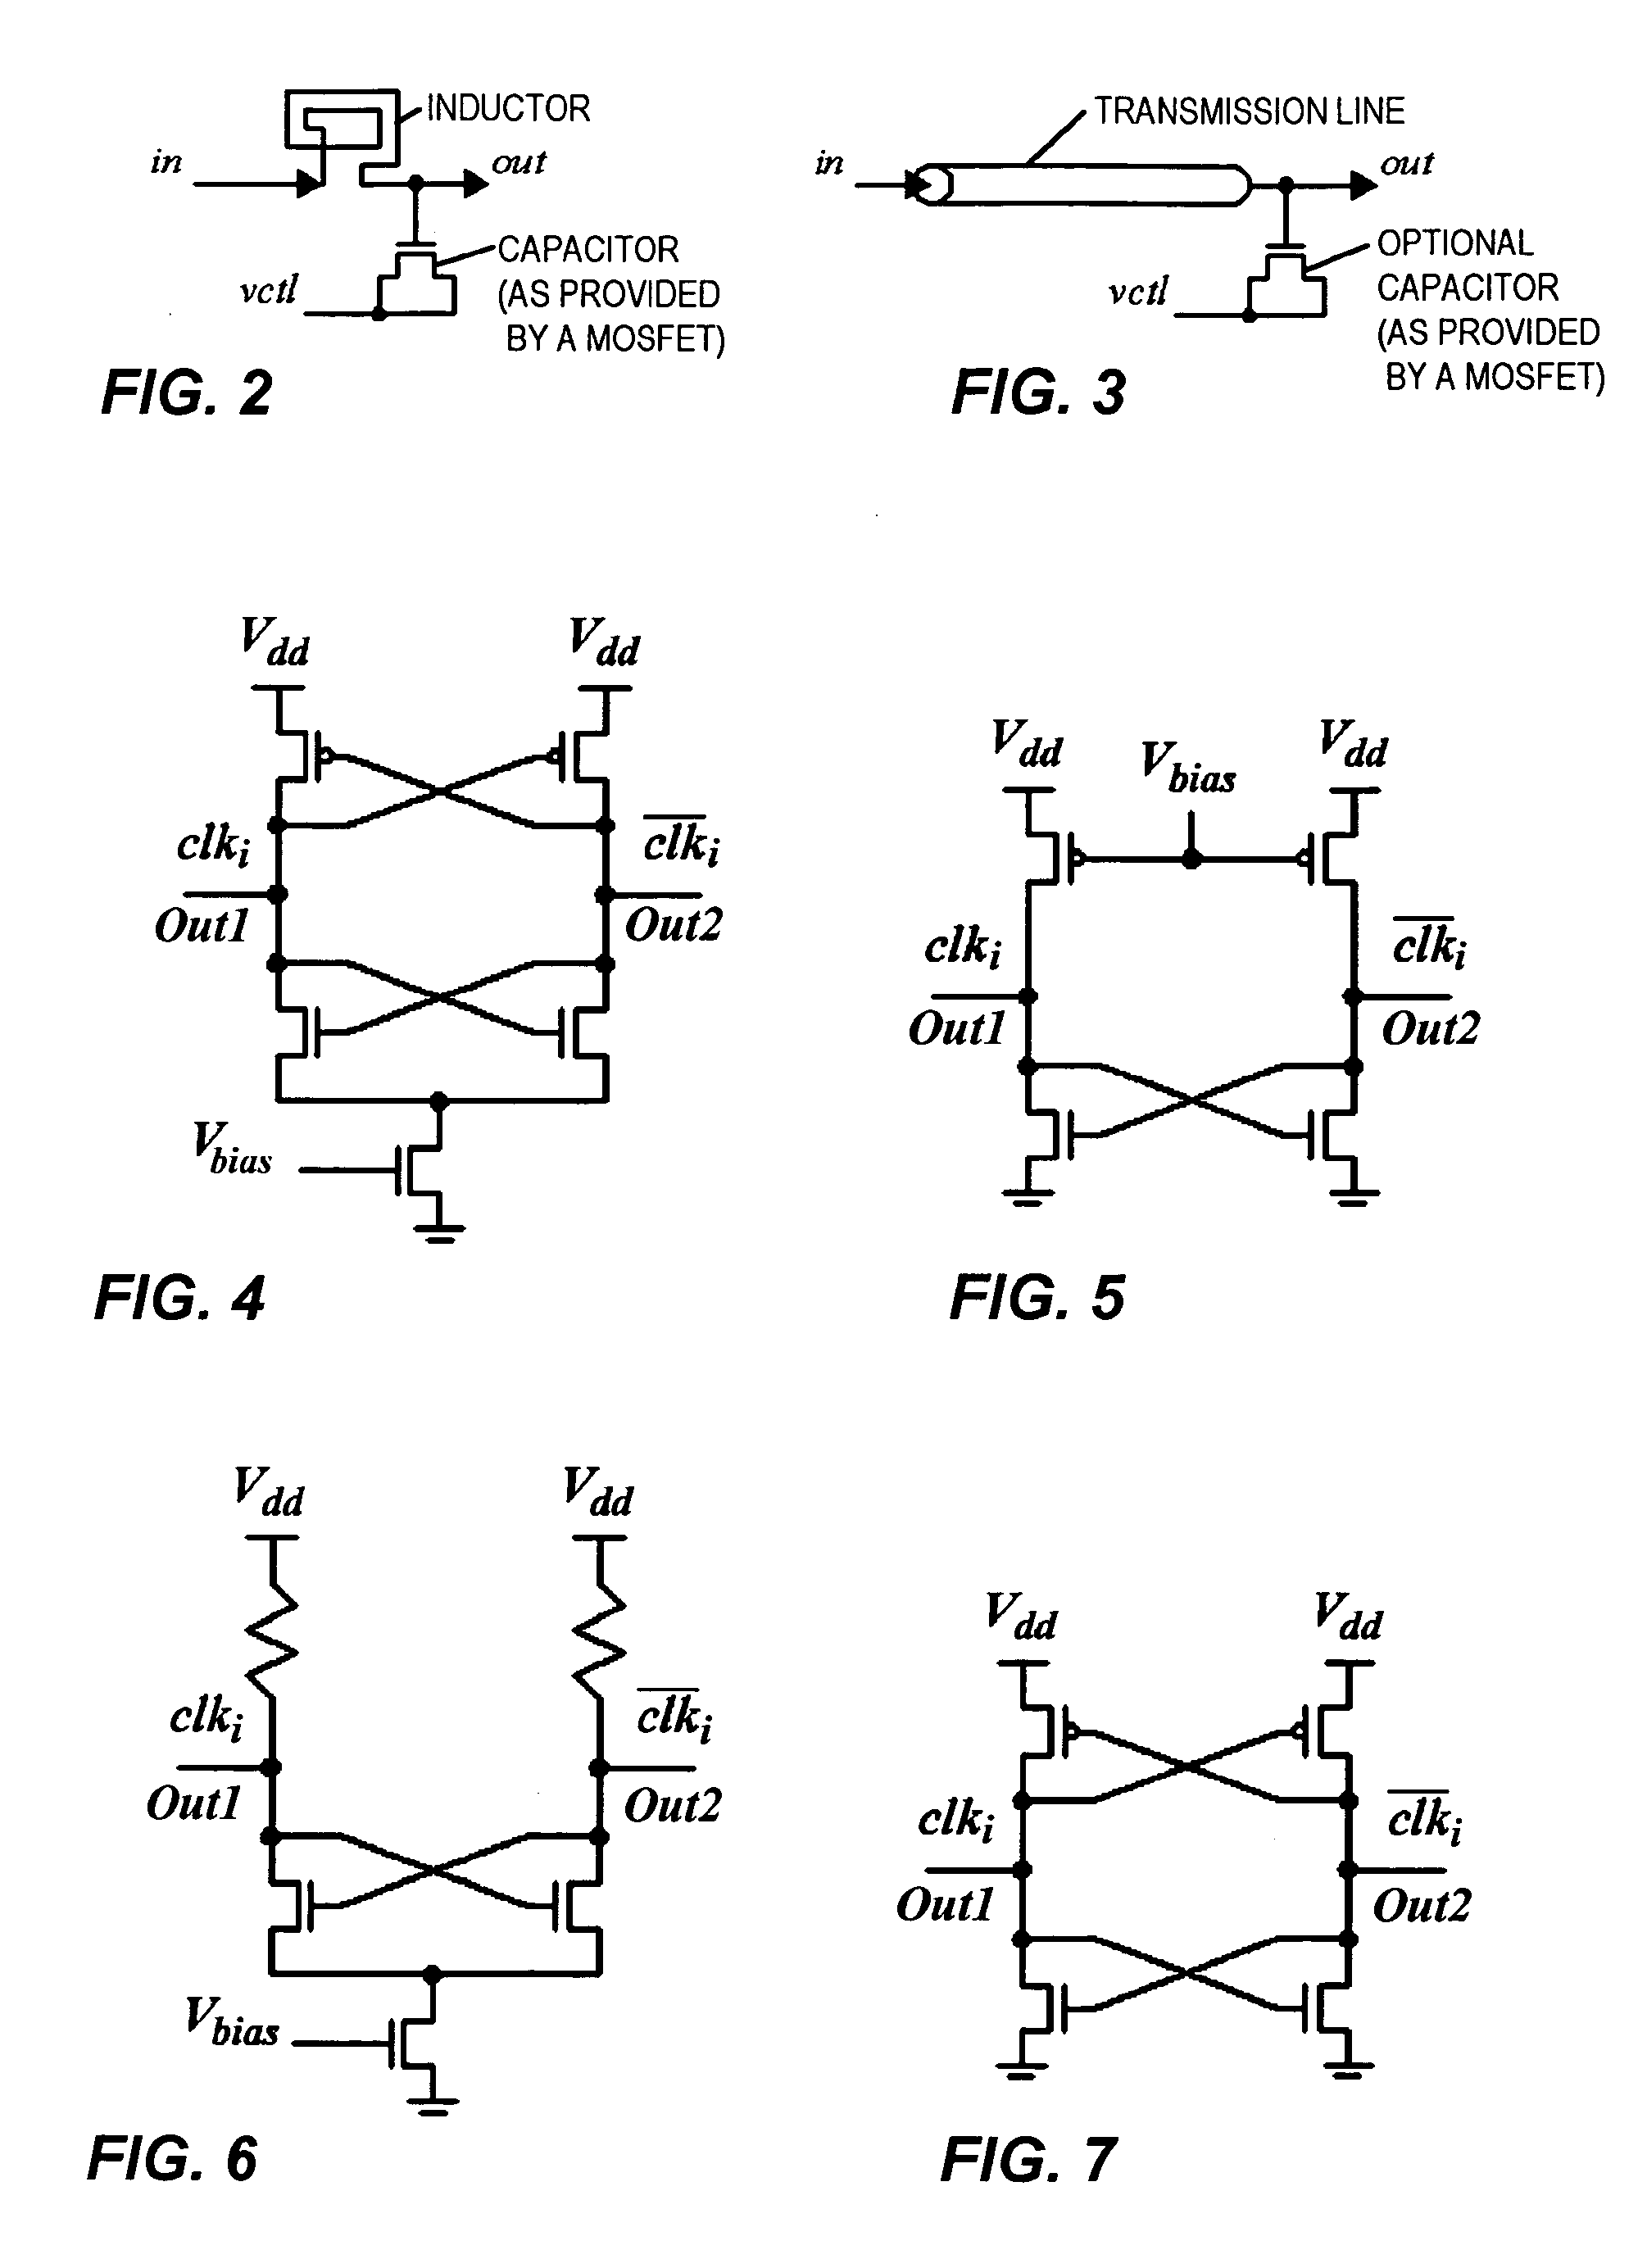 Electronic oscillators having a plurality of phased outputs and such oscillators with phase-setting and phase-reversal capability